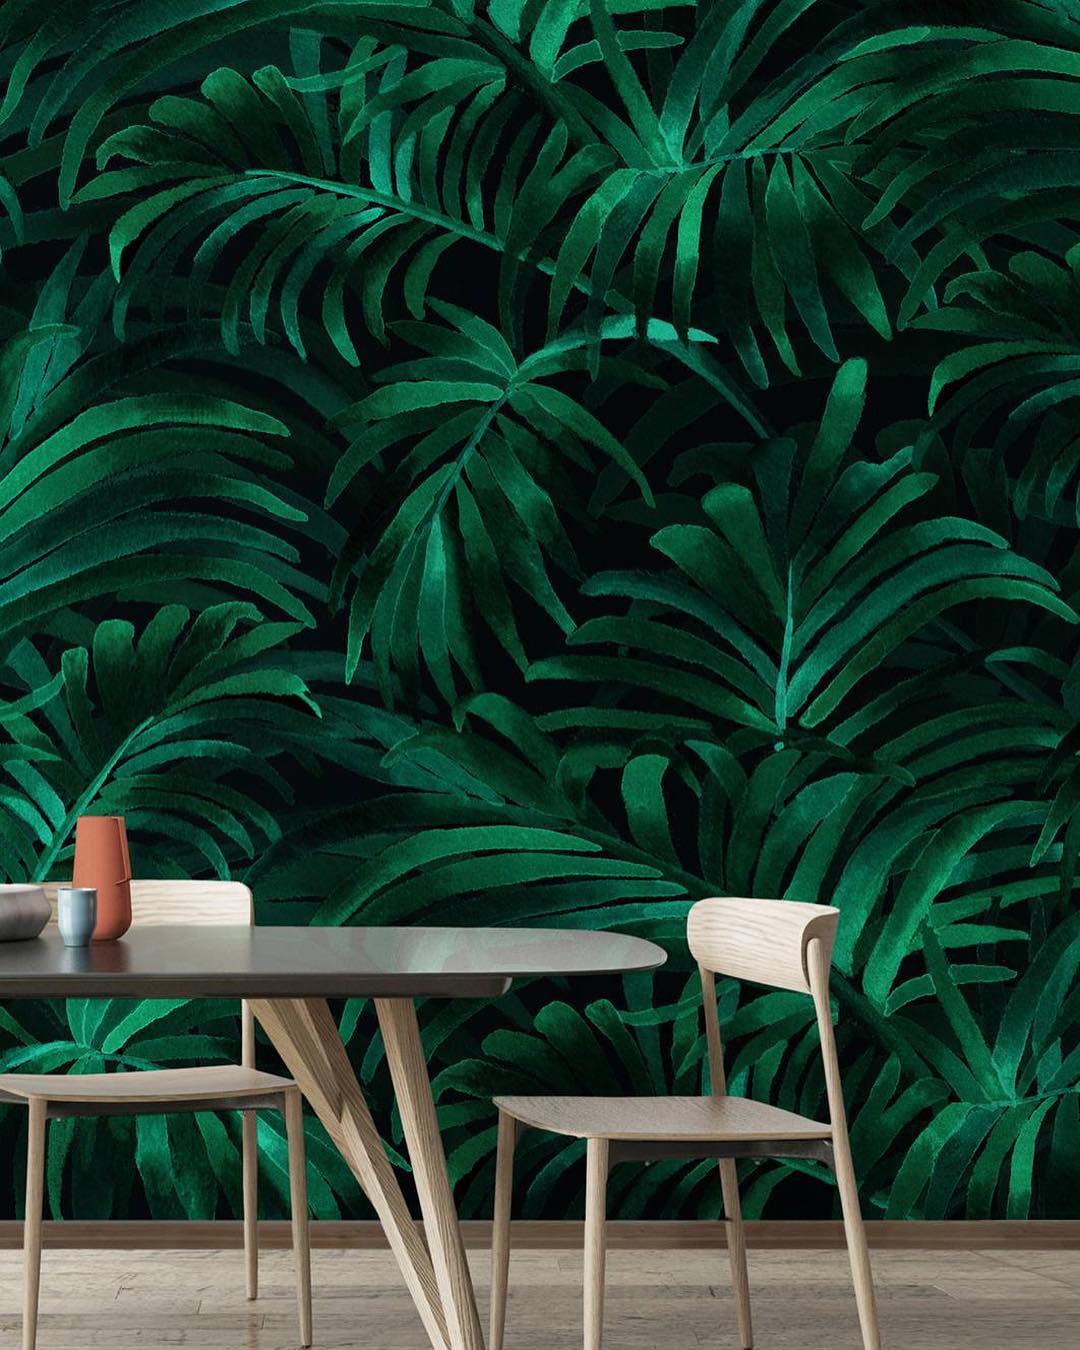 Palm plethora wallpaper. Photo by Instagram user @dalwindesigns